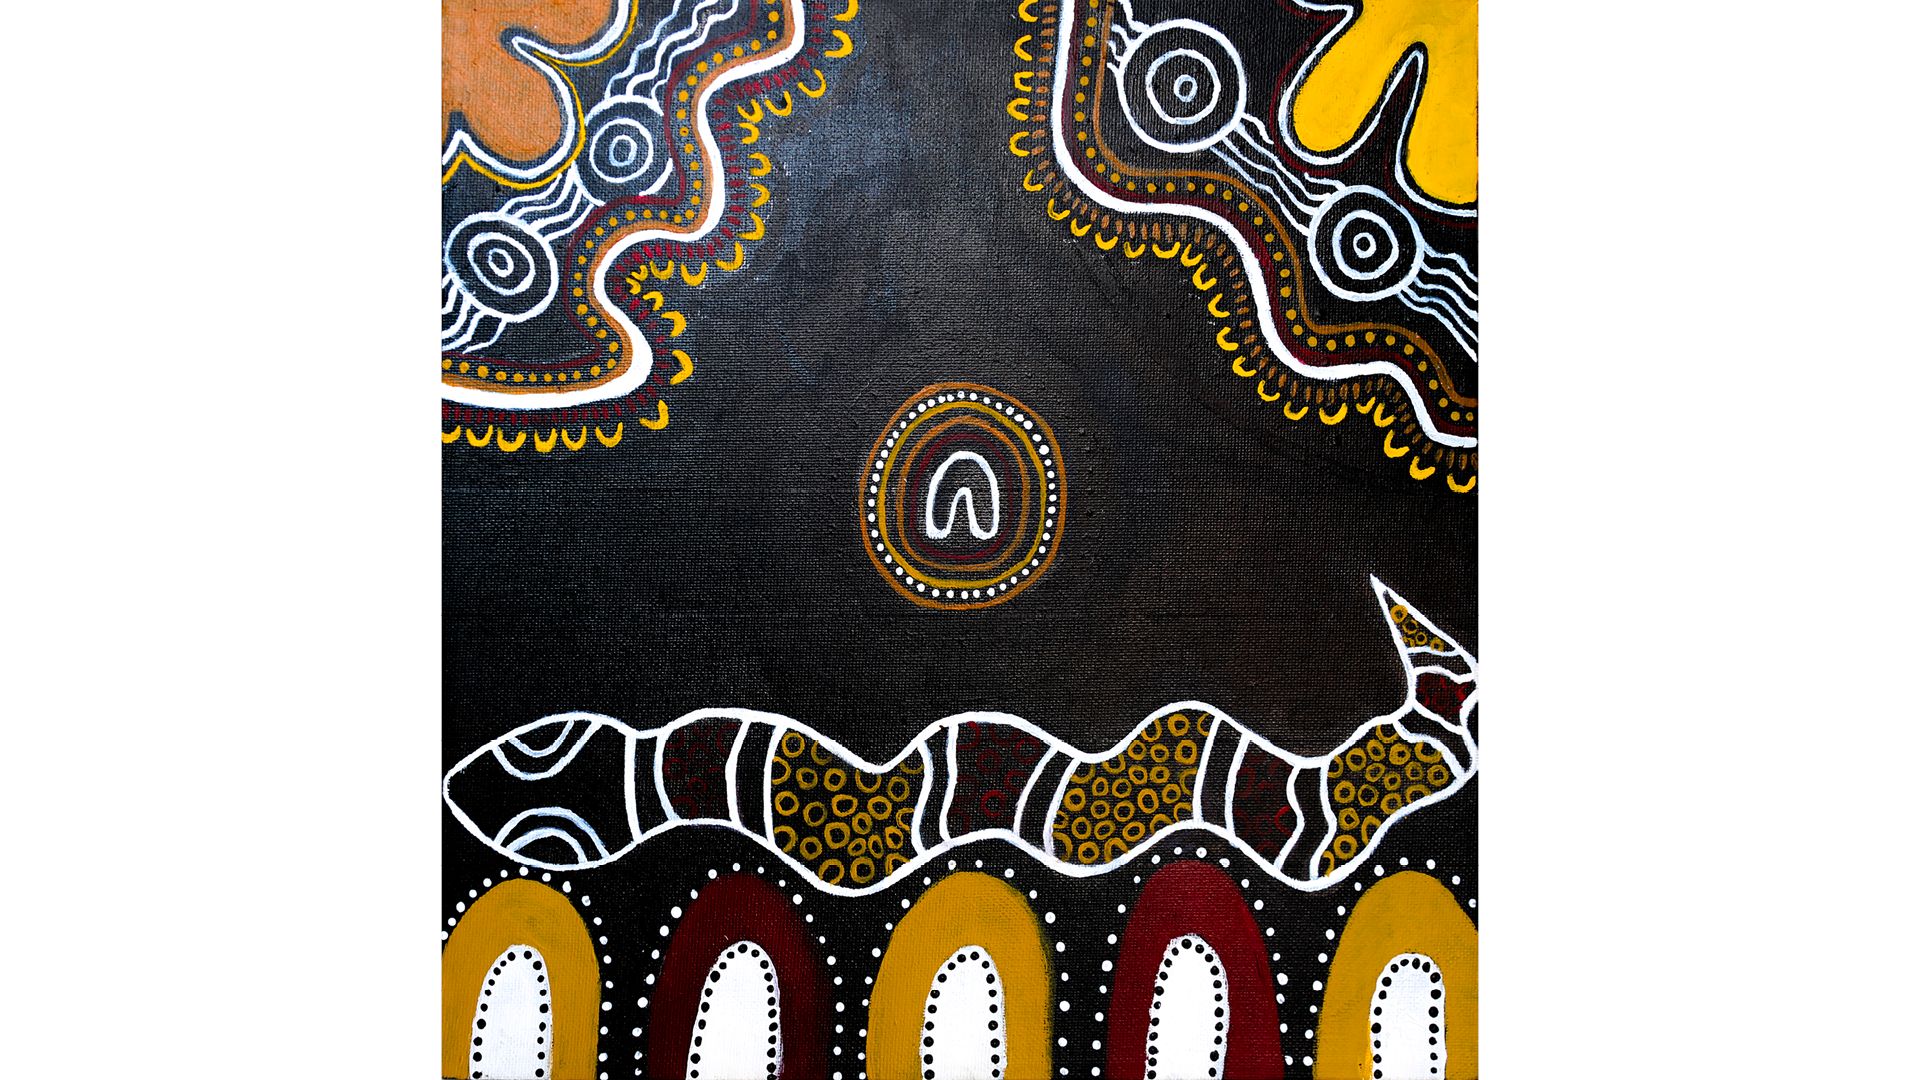 Acrylic on canvas artwork displaying a snake and other white, yellow and orange shapes on a black background 